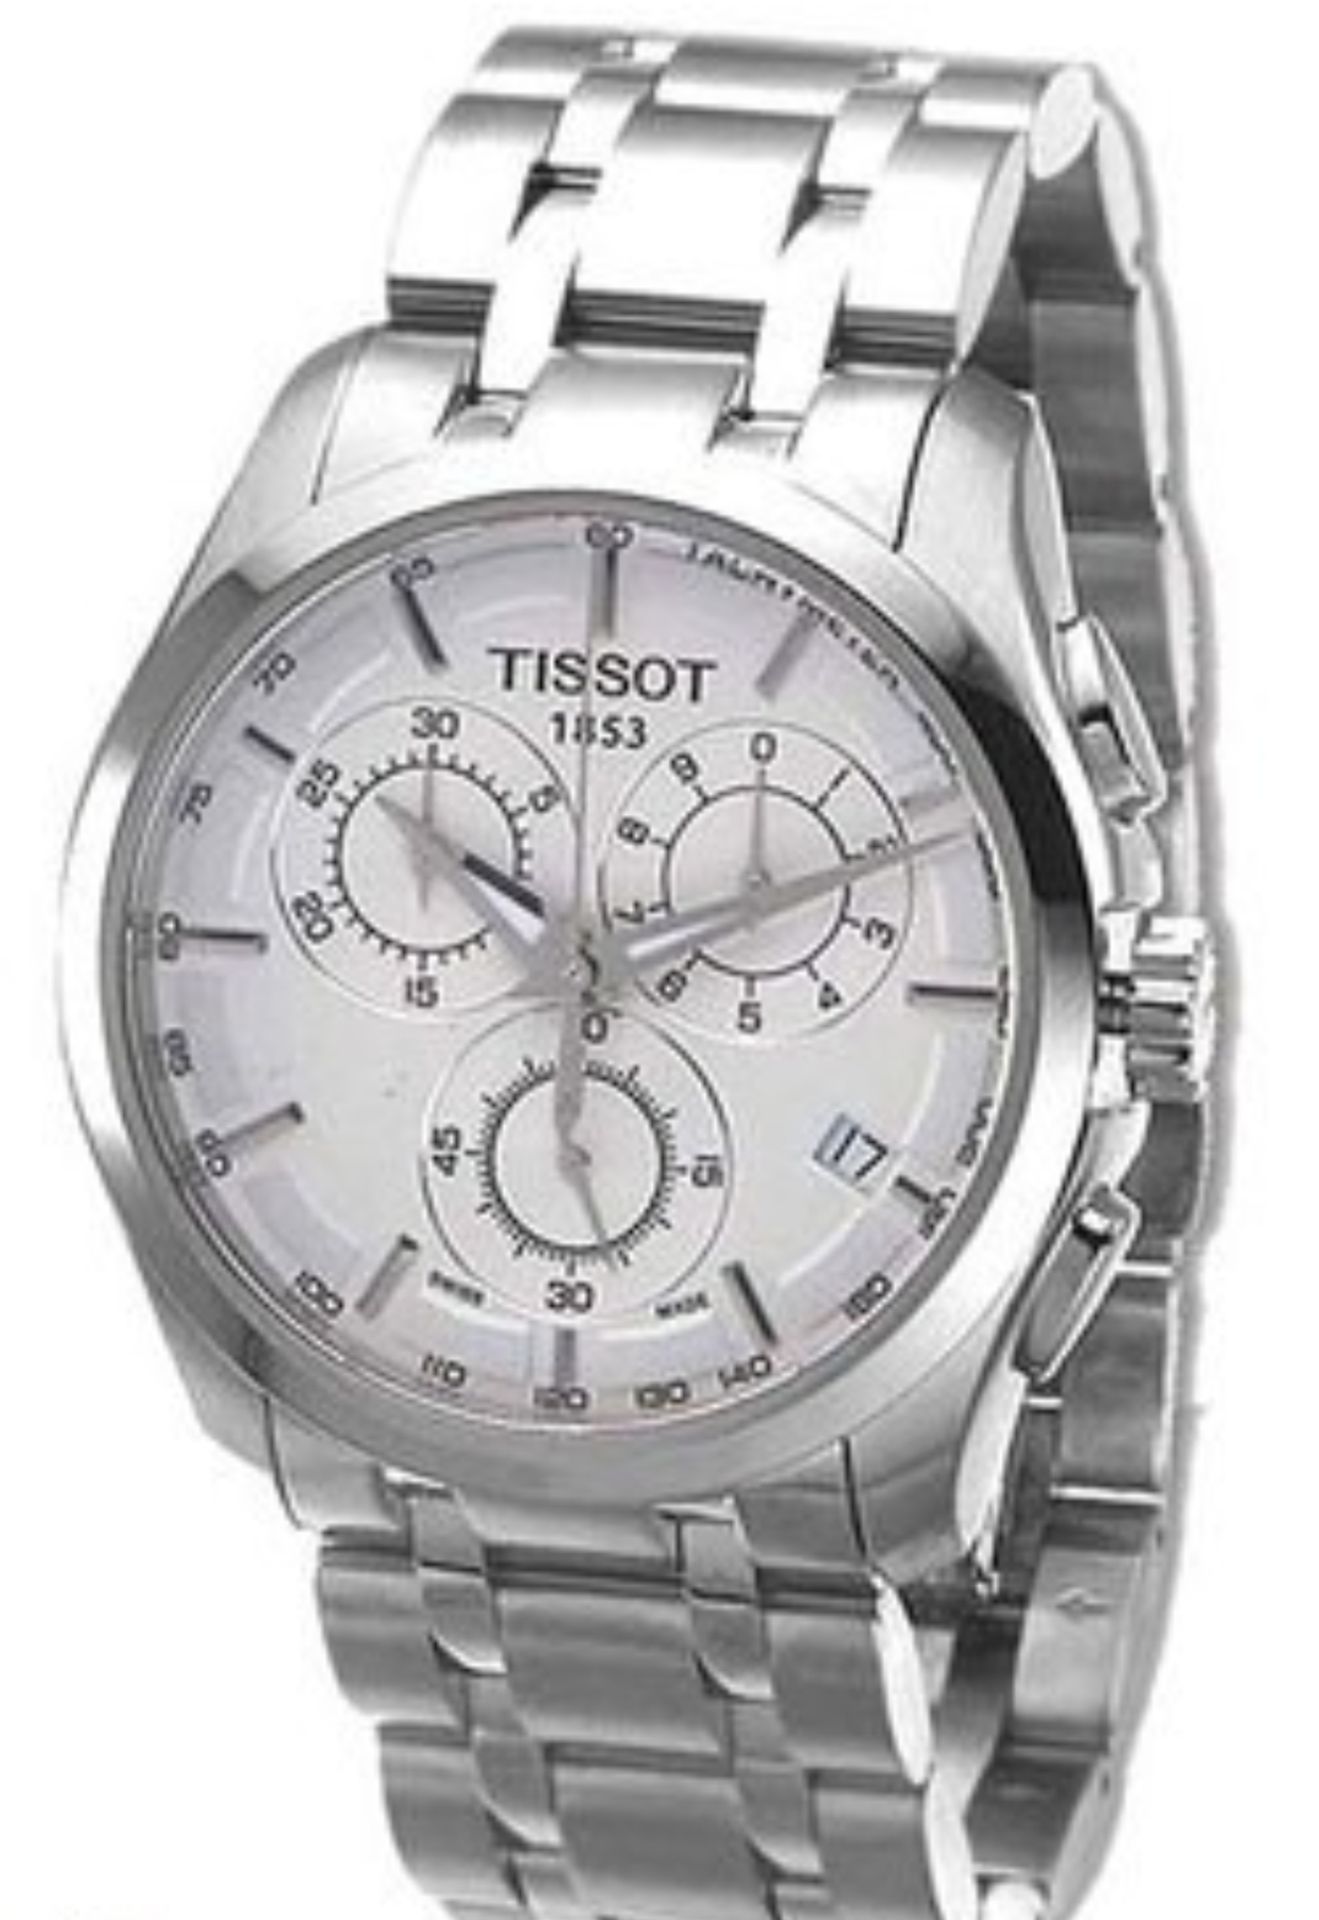 tissot men's t035.617.11.031.00 t-classic couturier chronograph watch - Image 6 of 10